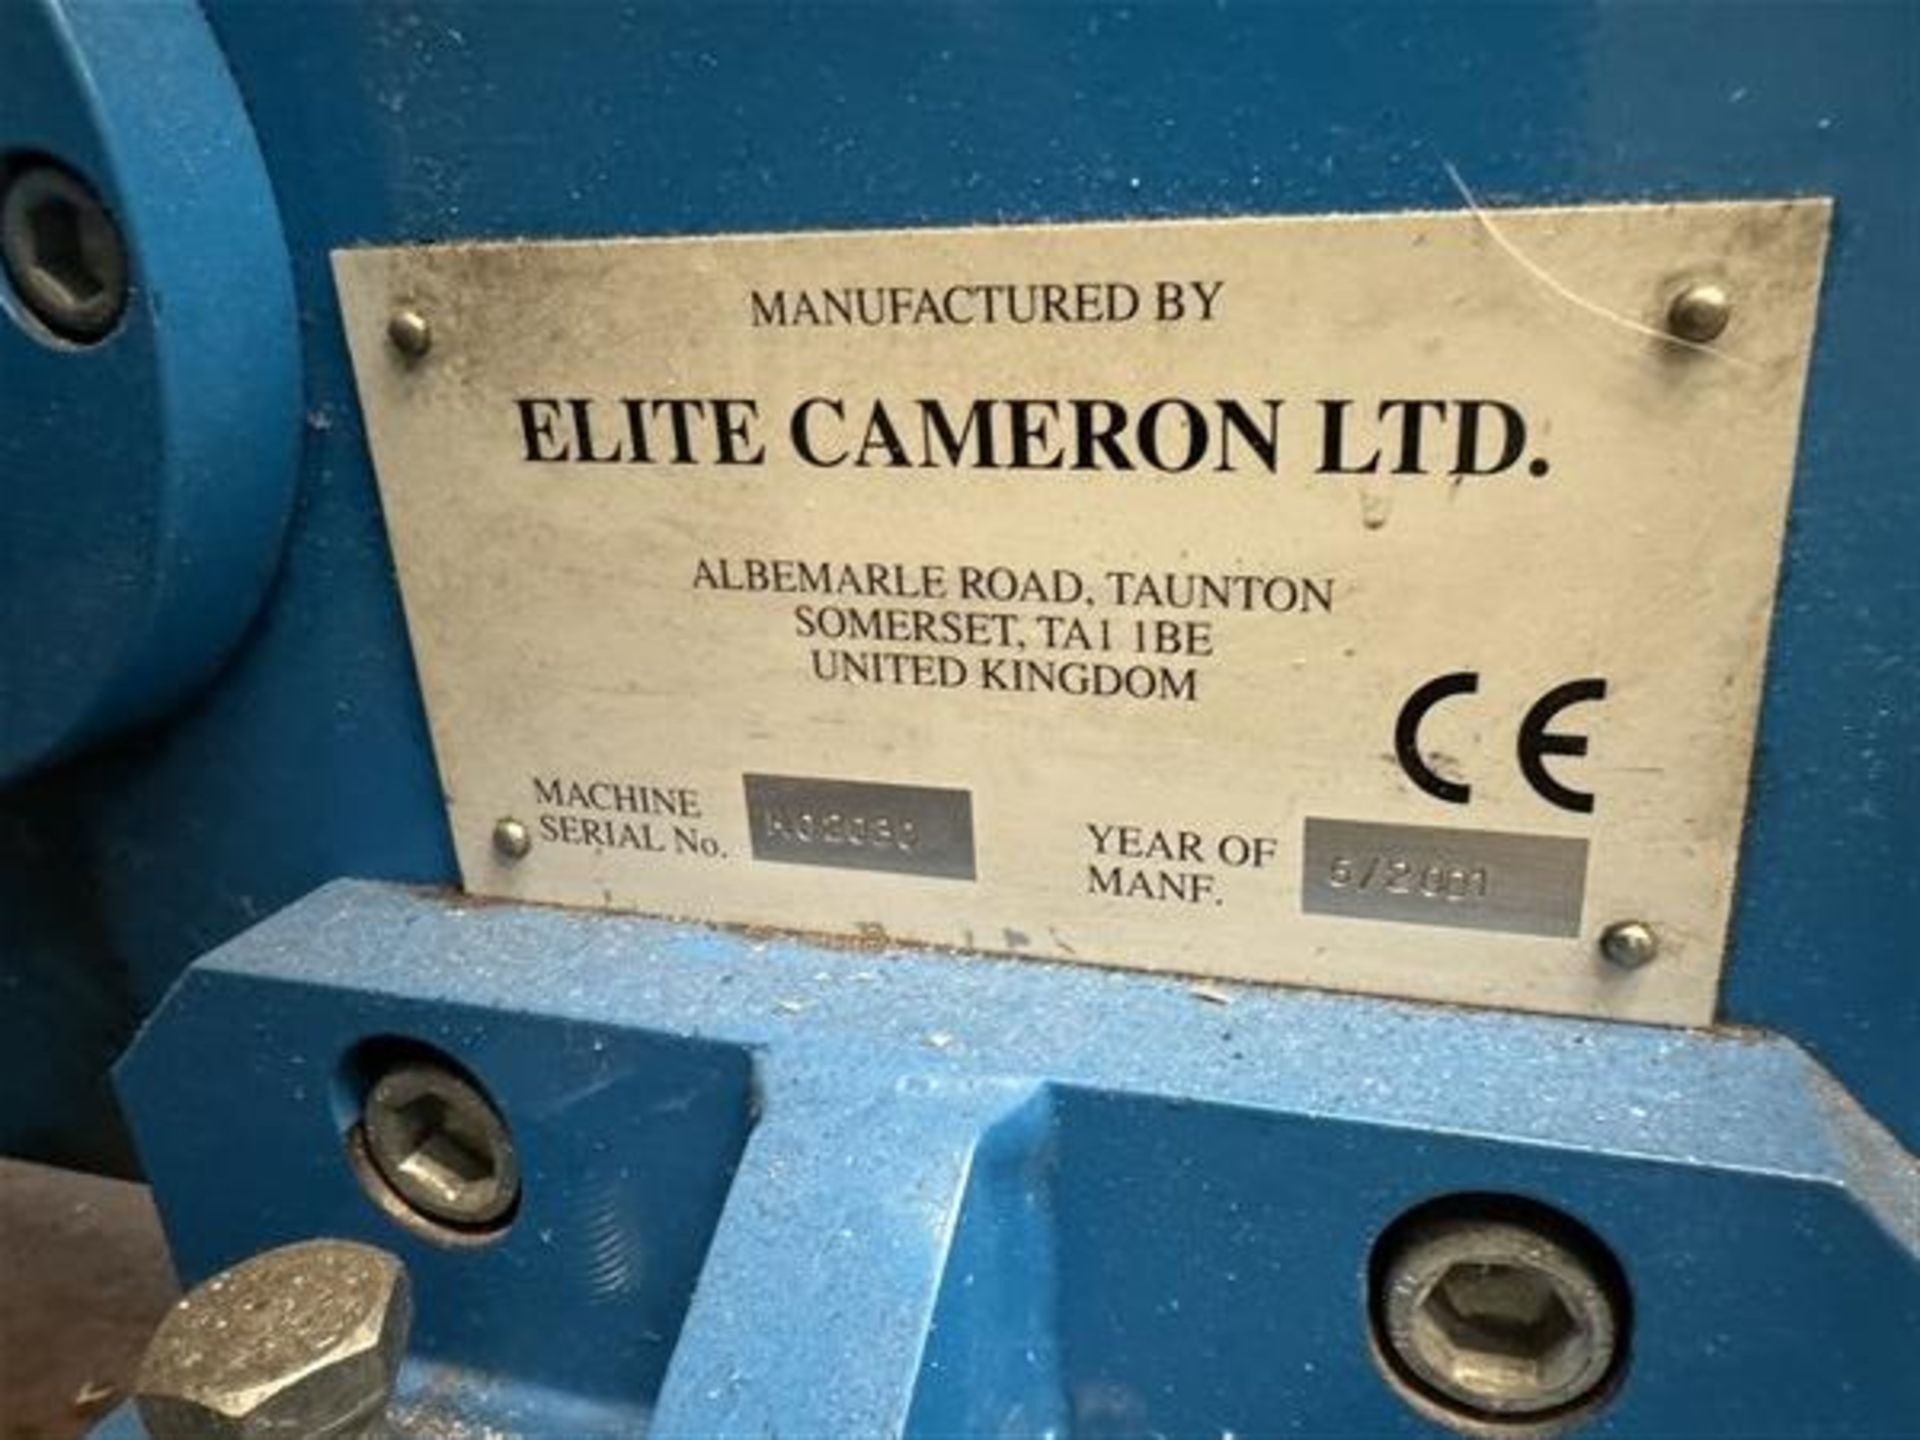 Elite Cameron CW600 automatic slitting machine, serial no. M02030 (2001) A work Method Statement and - Image 13 of 14